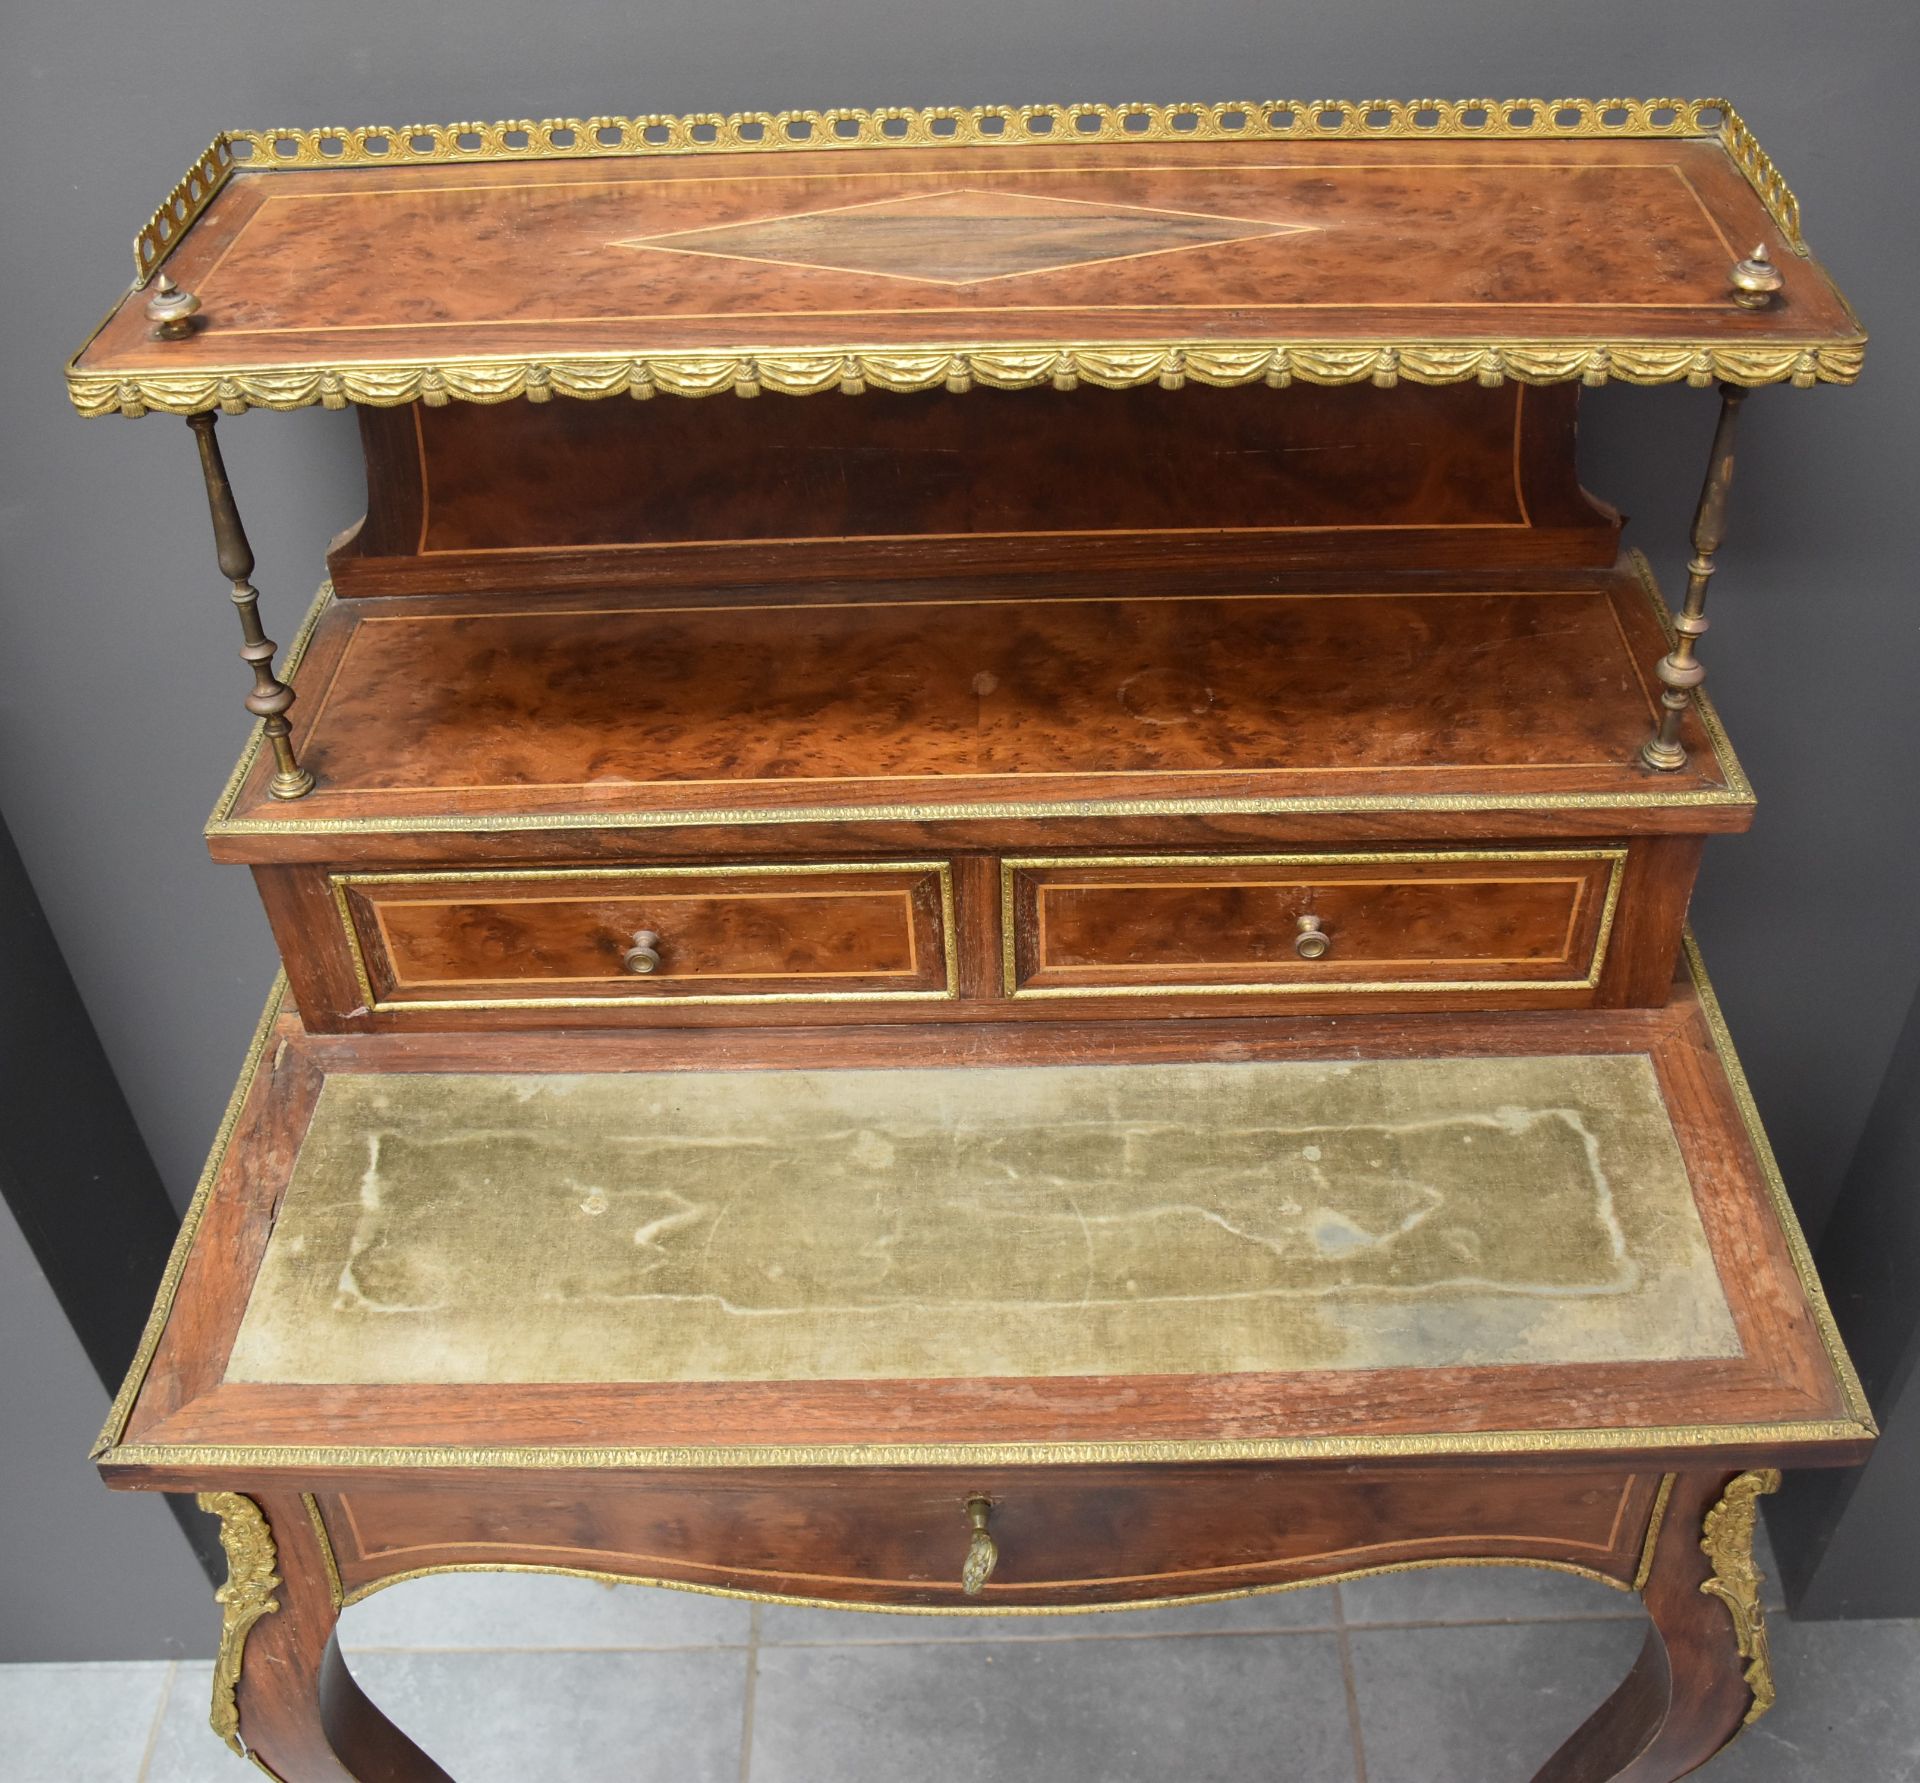 Napoleon III style stepped lady's desk. French work in veneer and bronze ornaments. Height: 116 cm. - Image 5 of 7